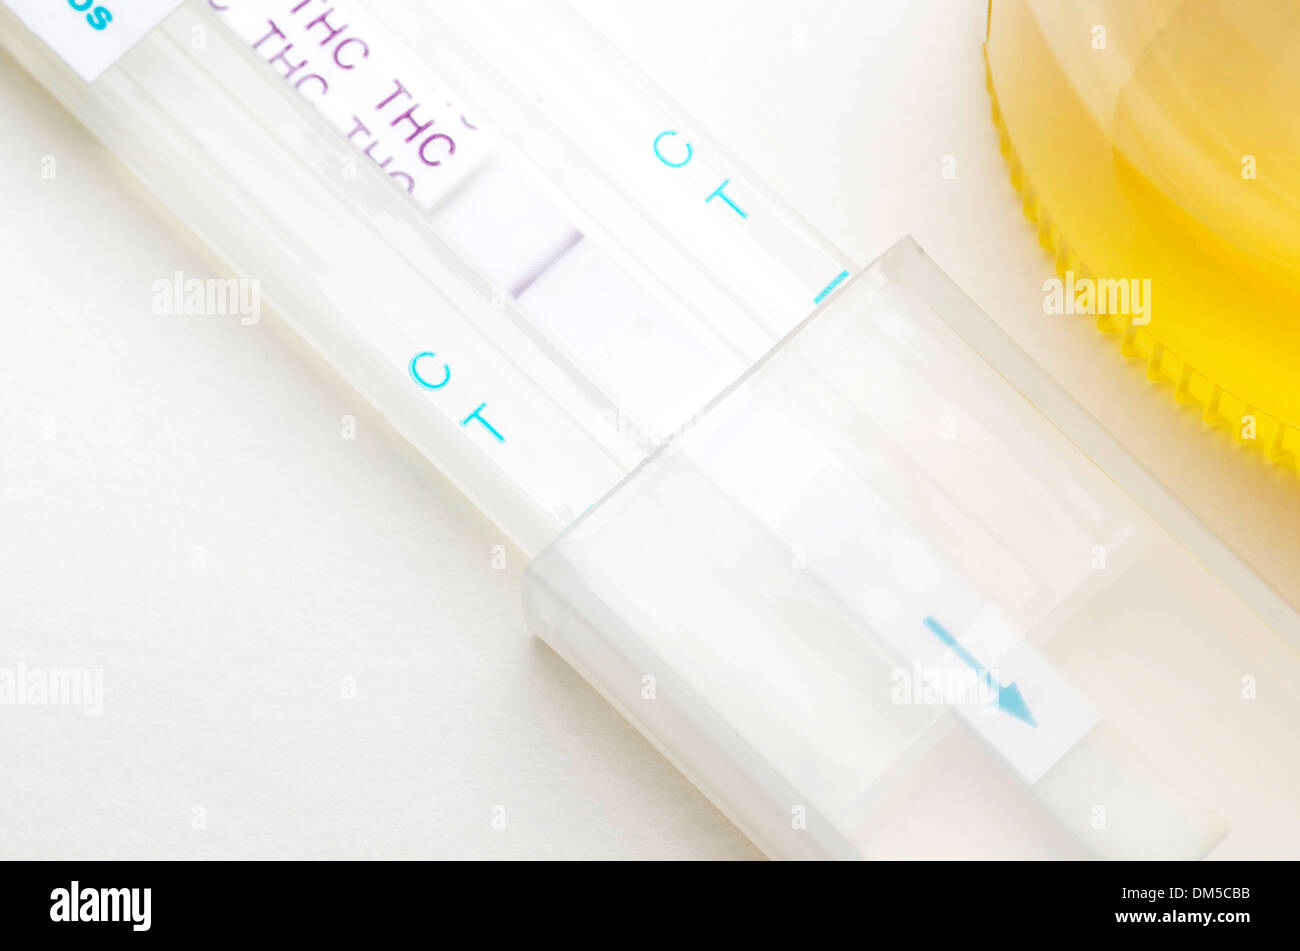 Marijuana test that is positive and includes the urine sample off to the right. Stock Photo